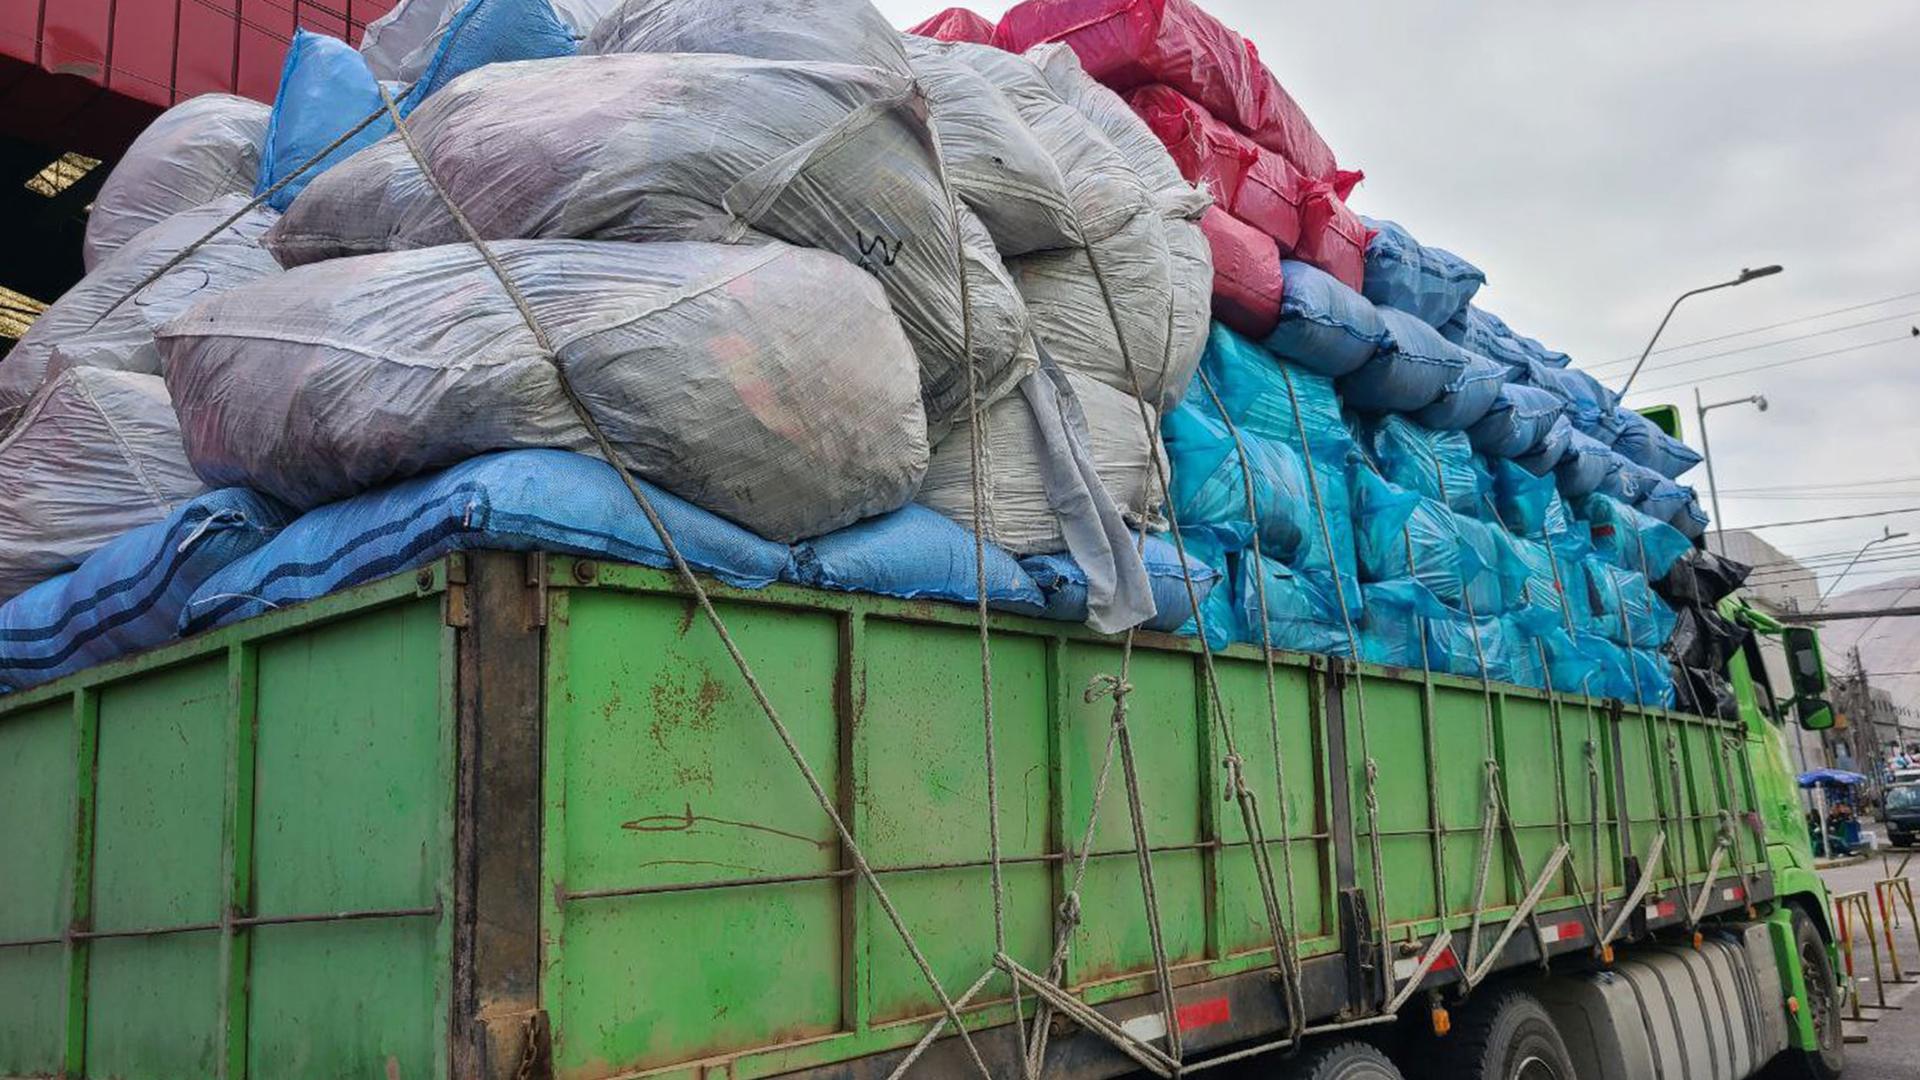 Hundreds of packages of clothes, known as "fardos", arrive every day at Iquique Port, Chile.